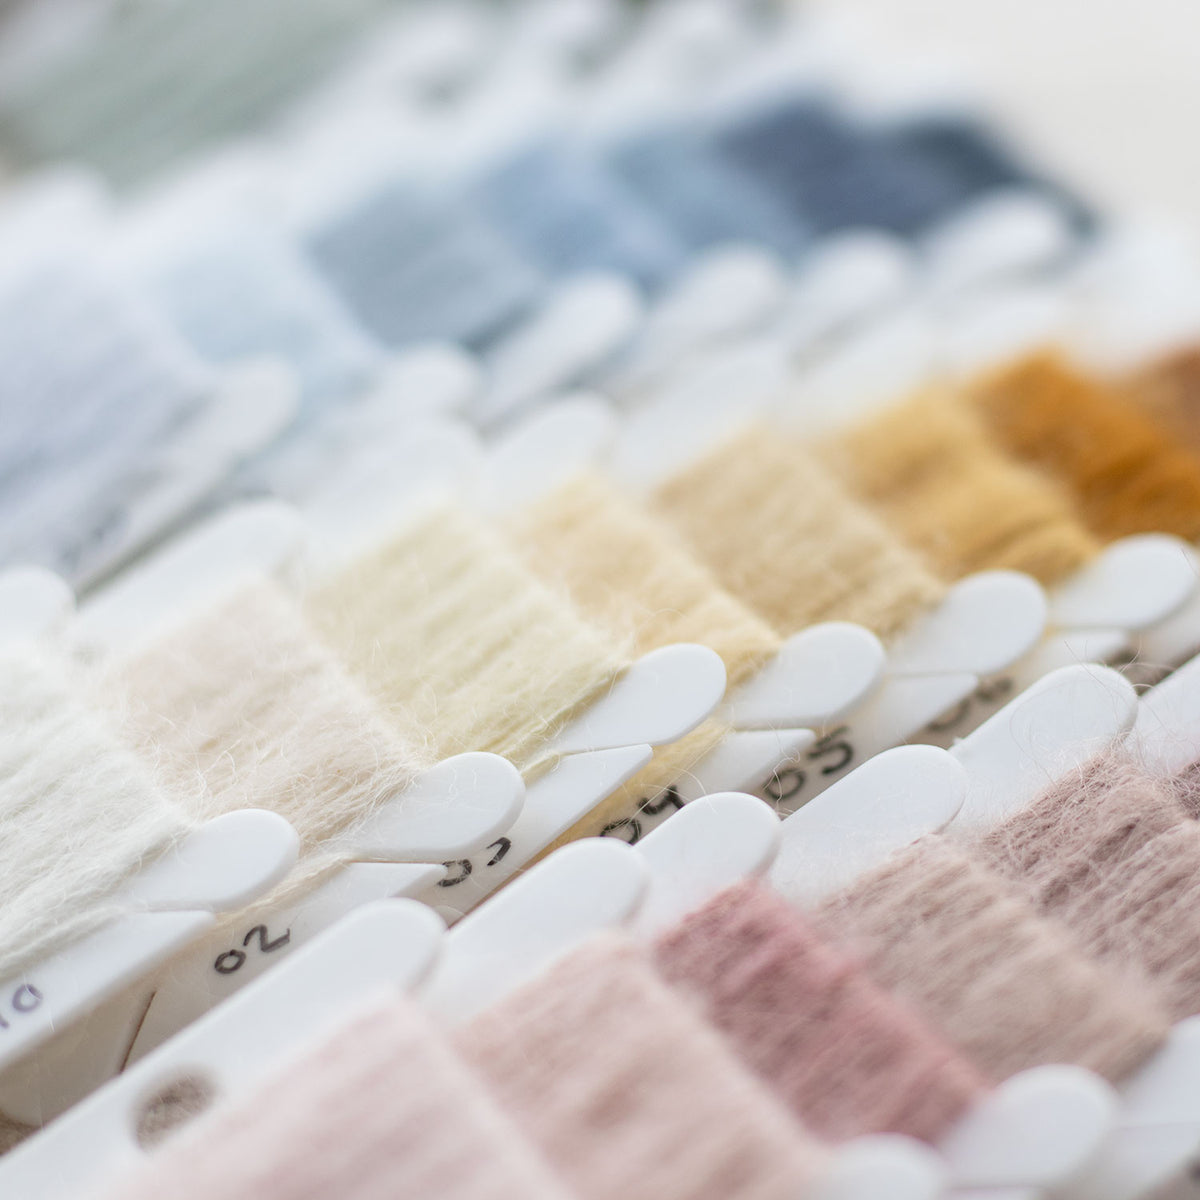 Color chart- Deluxe Silk Mohair